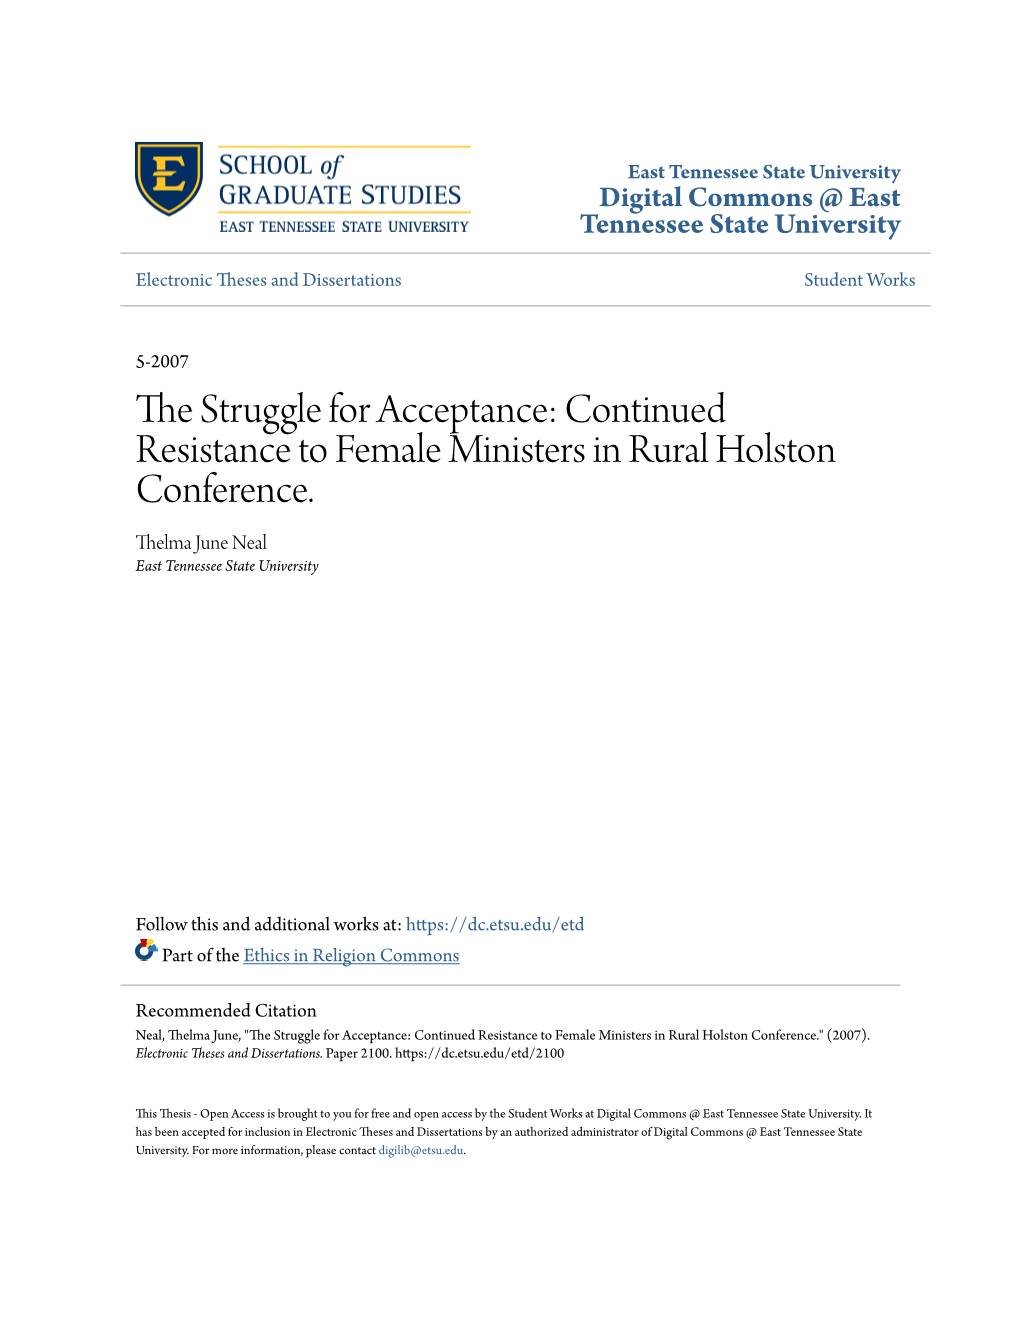 Continued Resistance to Female Ministers in Rural Holston Conference